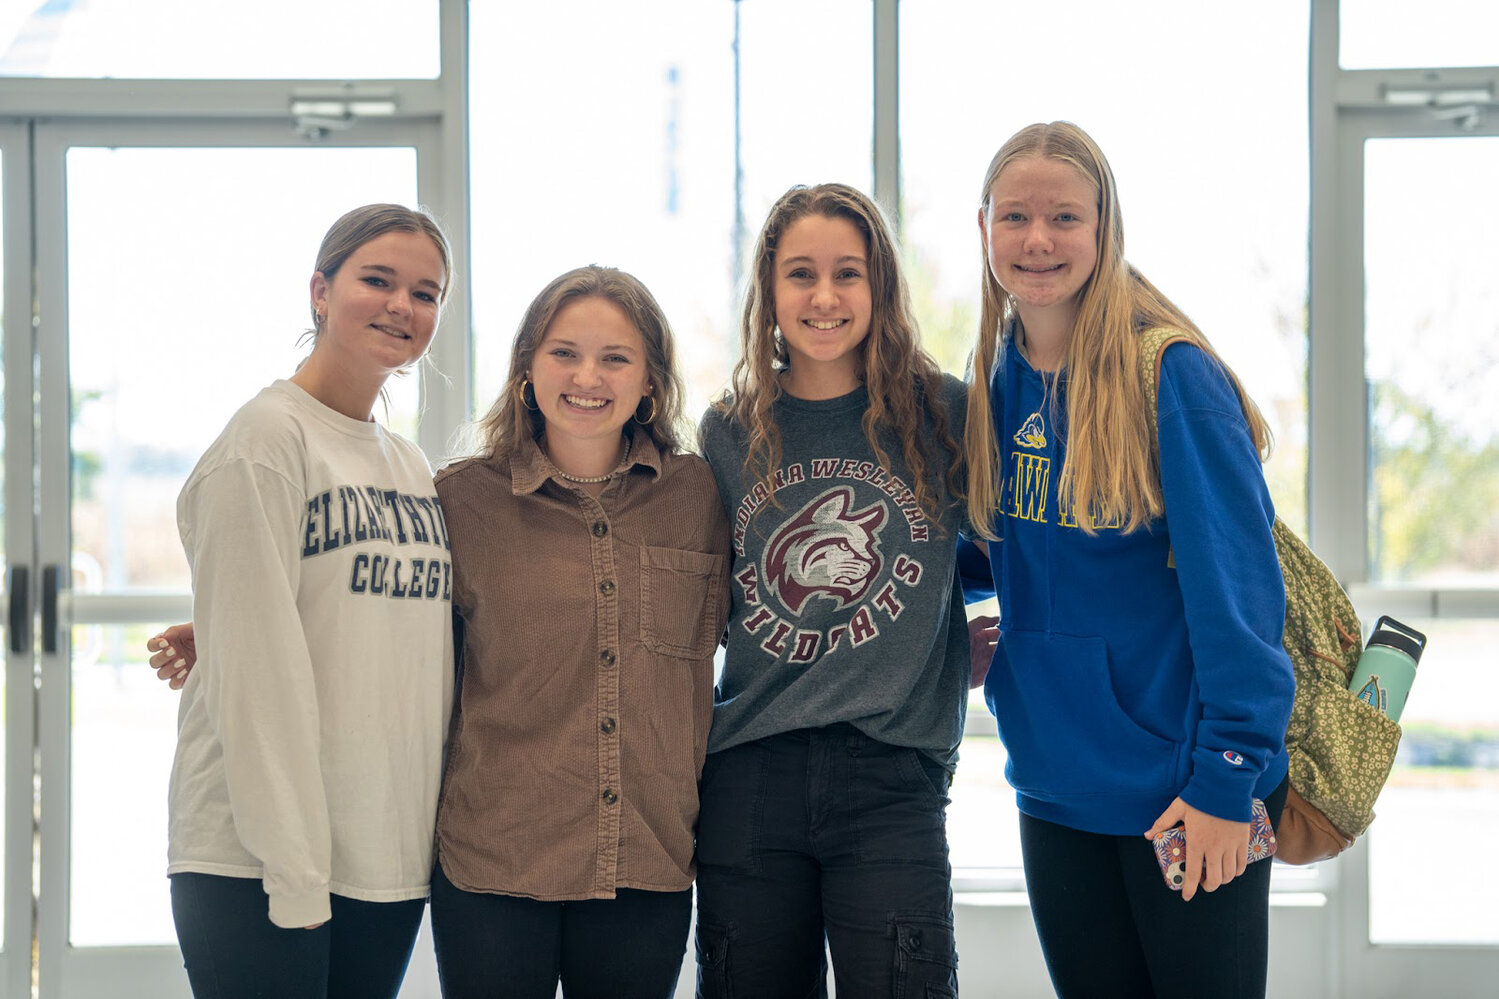 Libby Dawson, Megan Yoder, Layni Dukes, and Emily Obertubbesing spent their extended lunch period chatting with college representatives during College Week at Delmarva Christian High School.